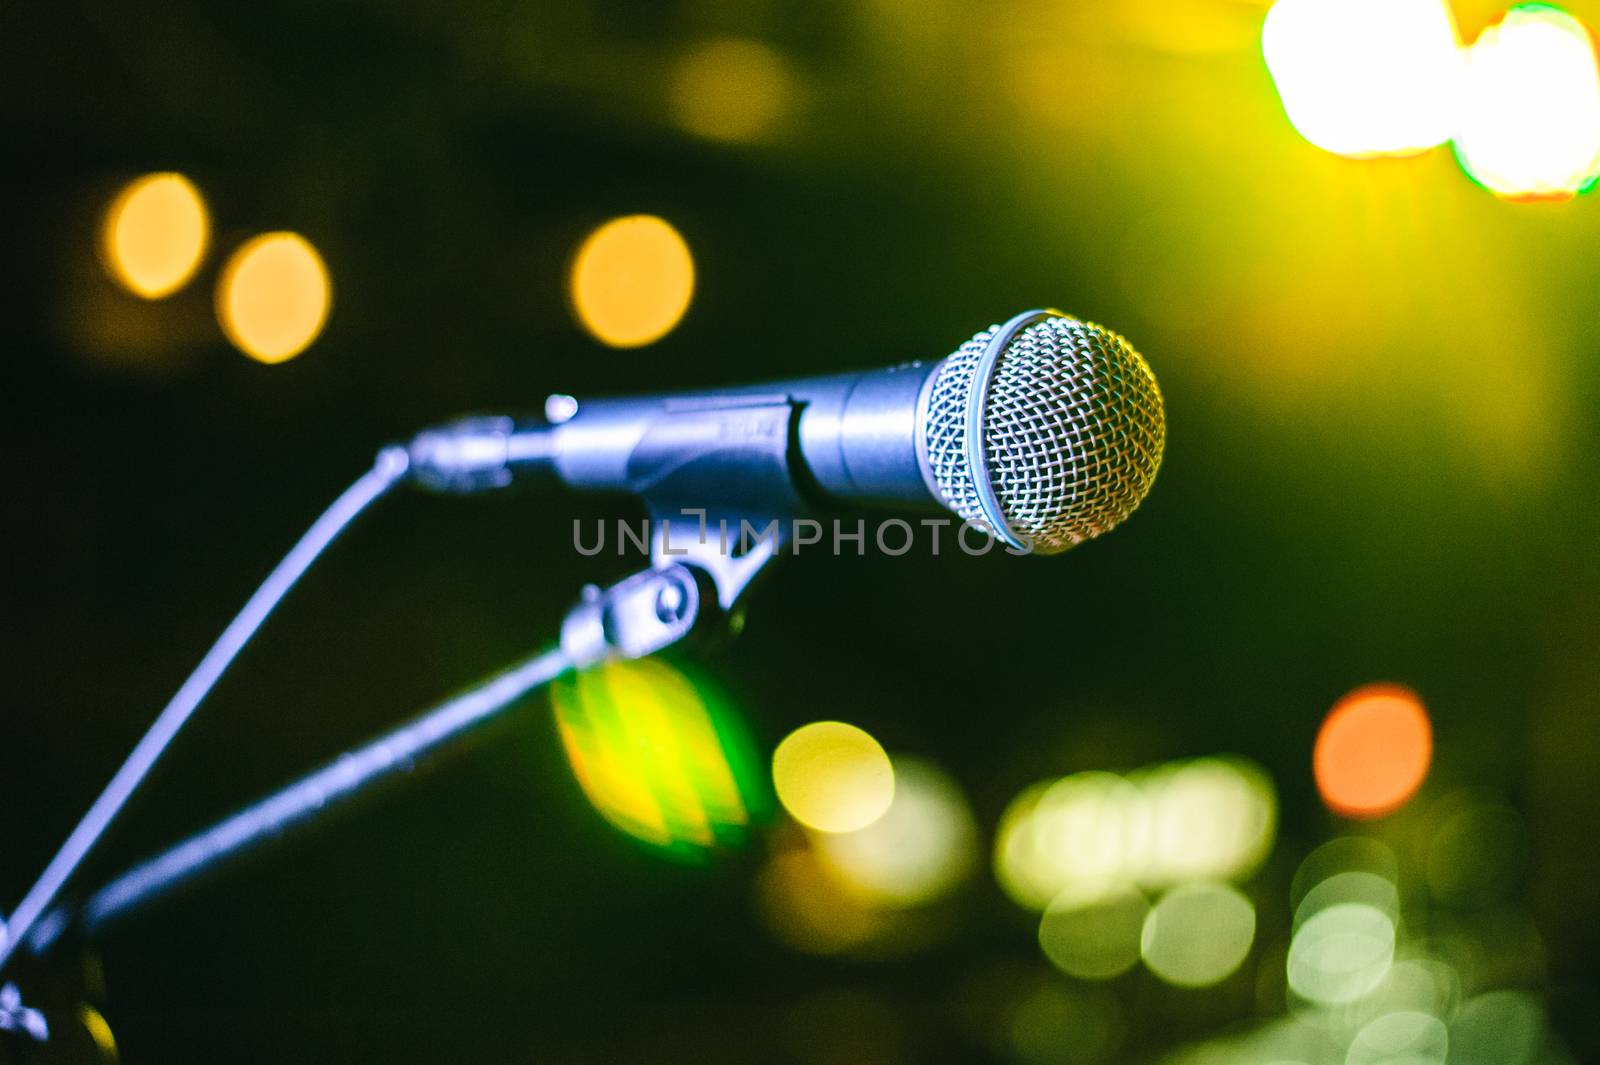 singer's vocal microphone stands on stage during a concert with multi-colored lights on the background by chernobrovin